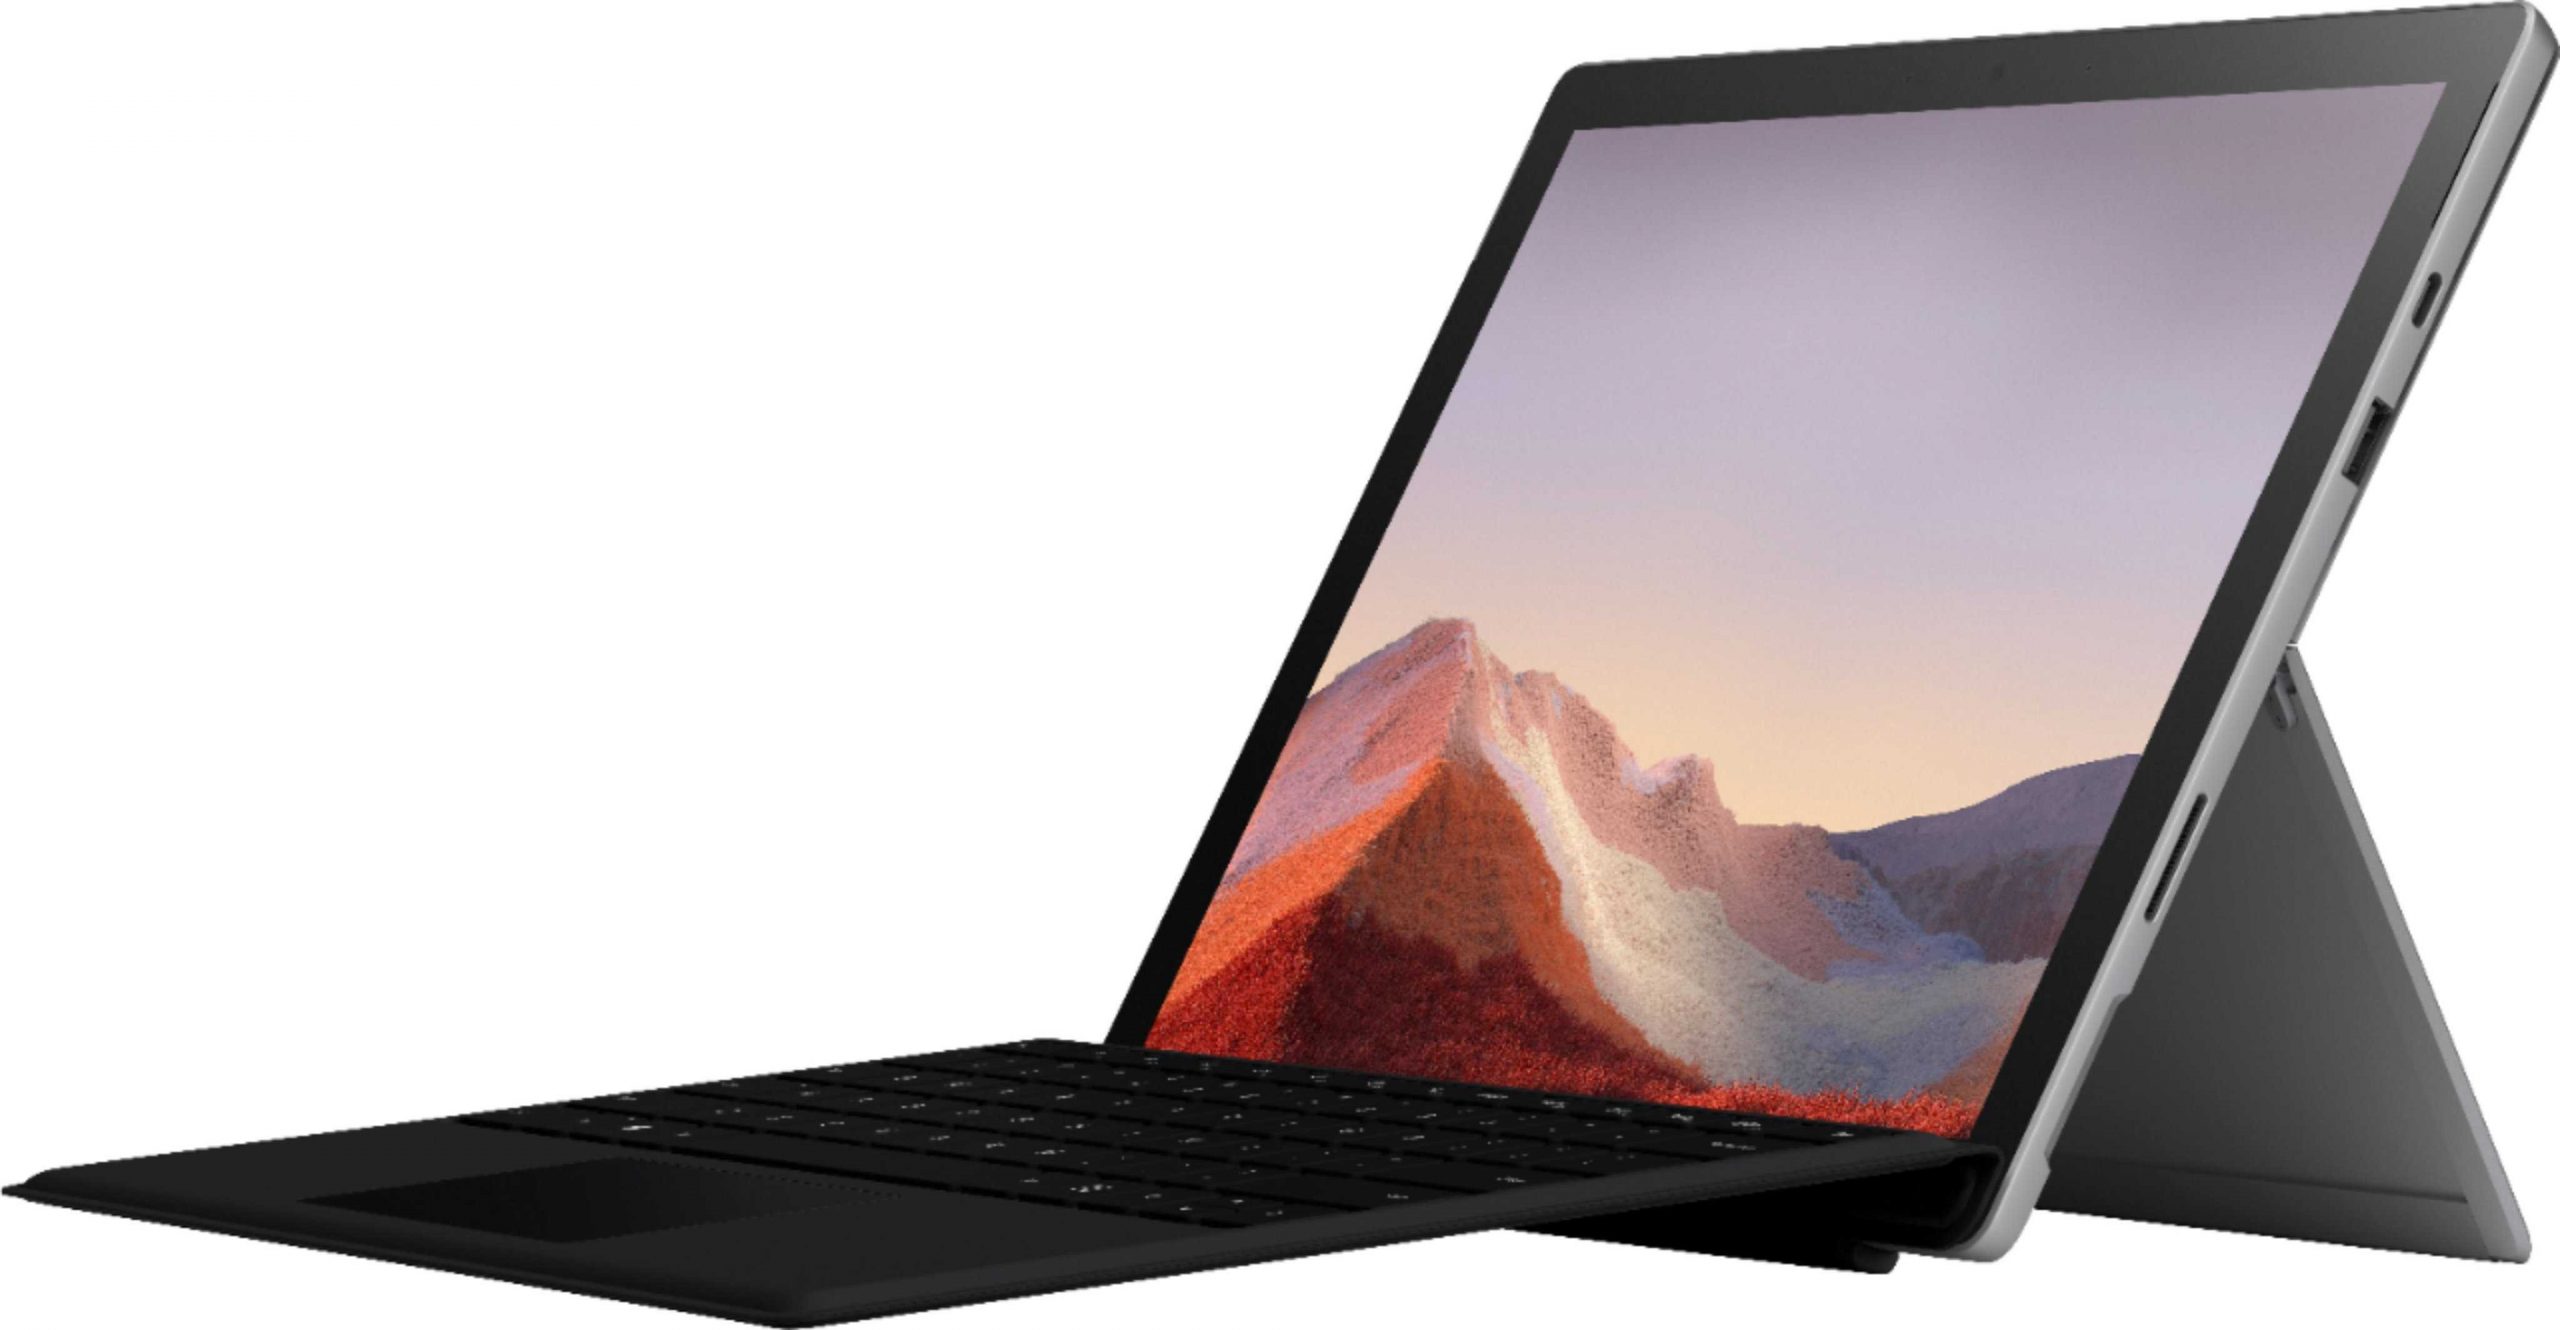 Microsoft to upgrade specs of the base Surface Pro 8: Report